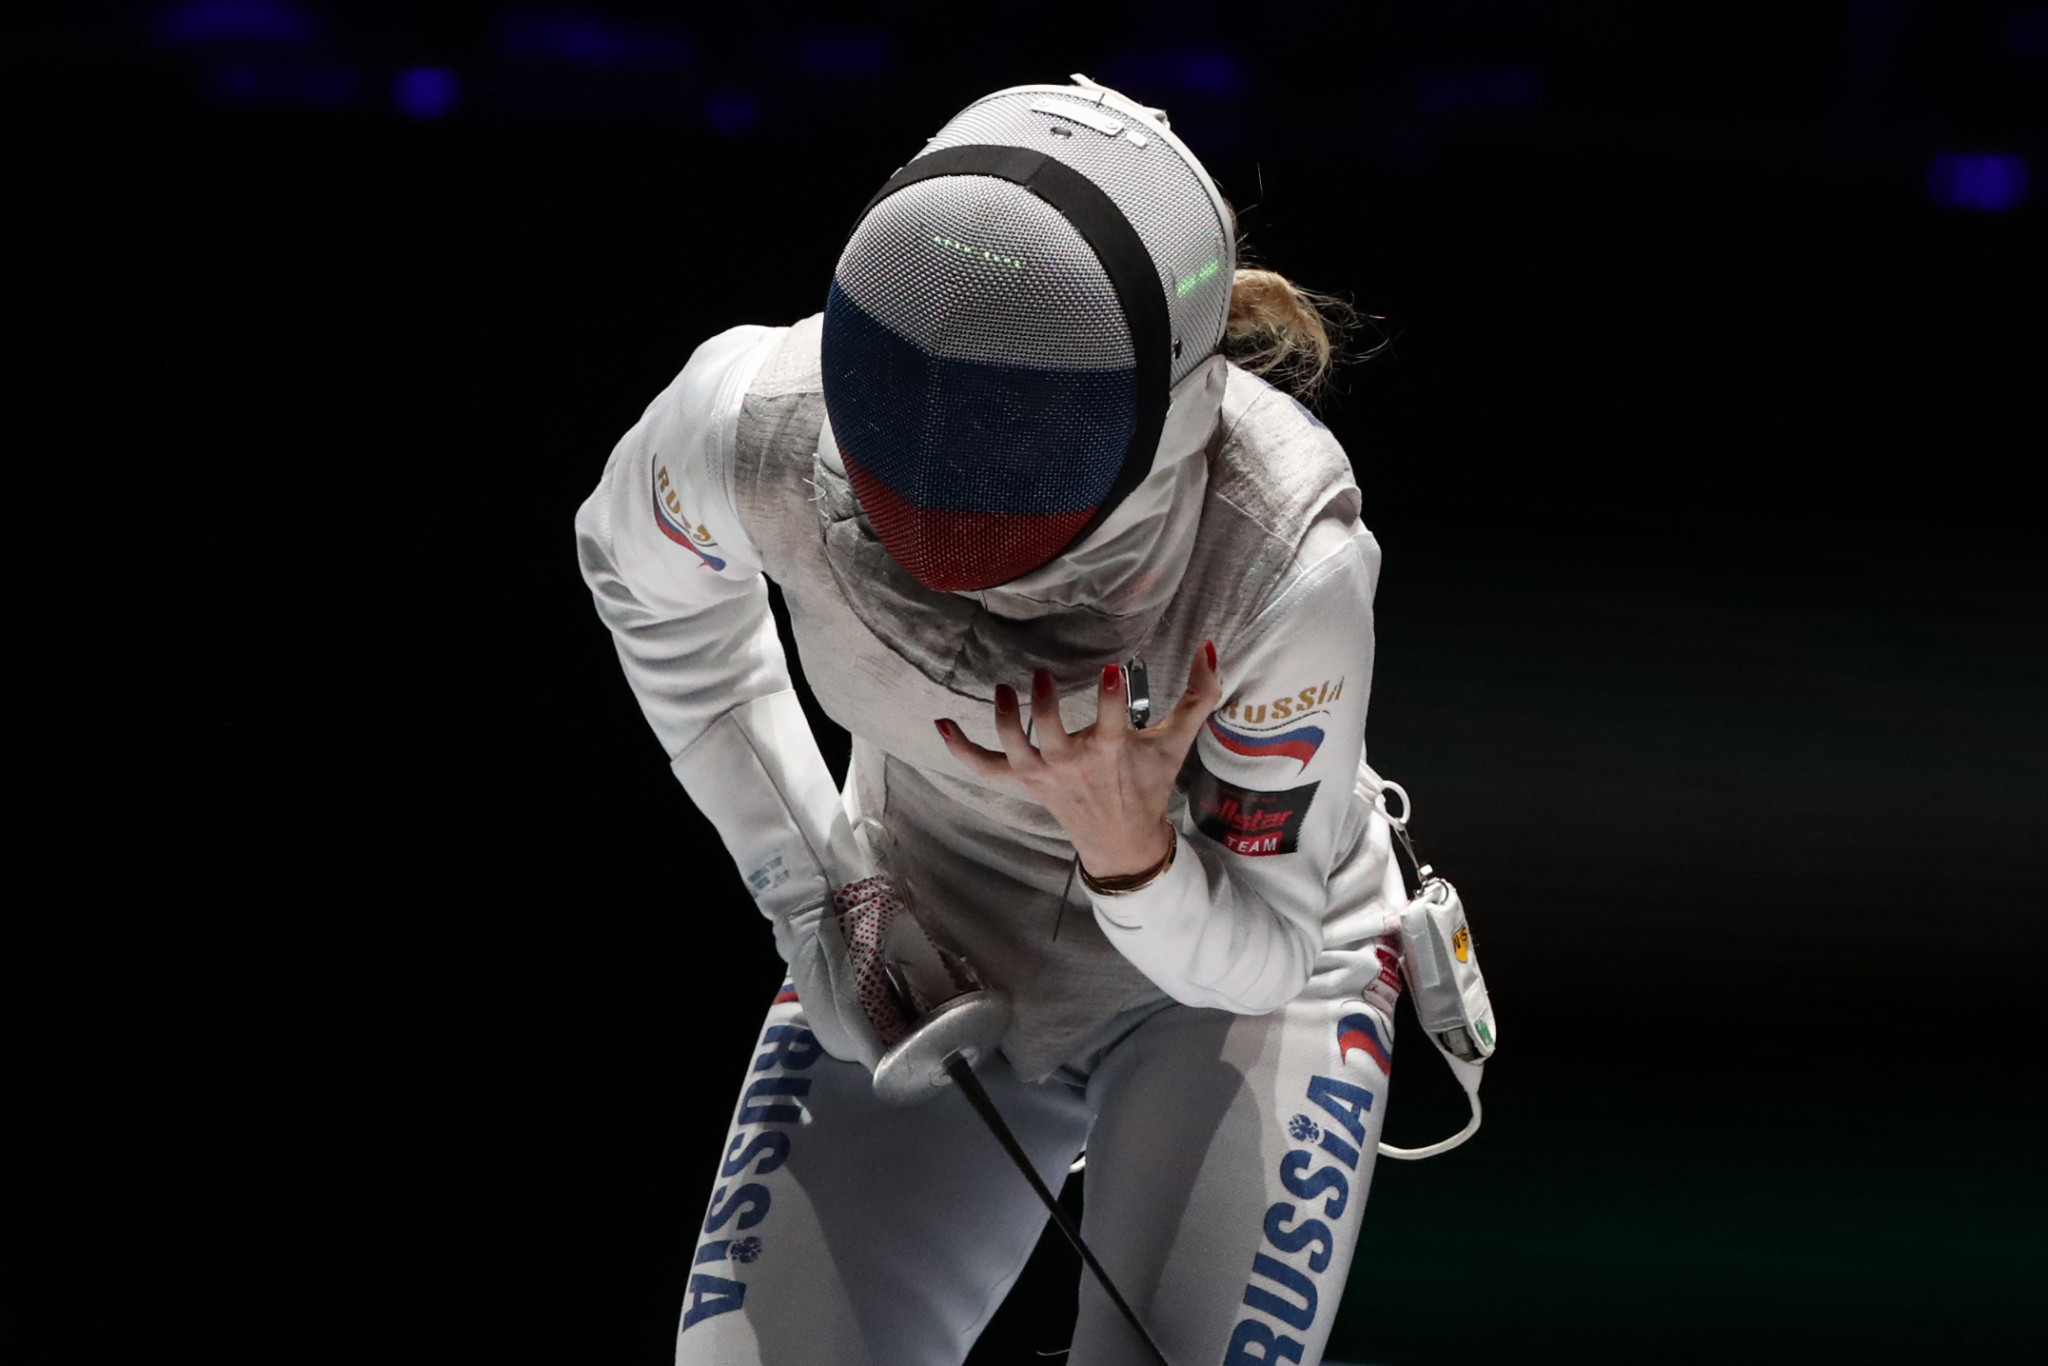 Inna Deriglazova is the favourite to triumph at the FIE Women's Foil World Cup in Saint-Maur ©Getty Images